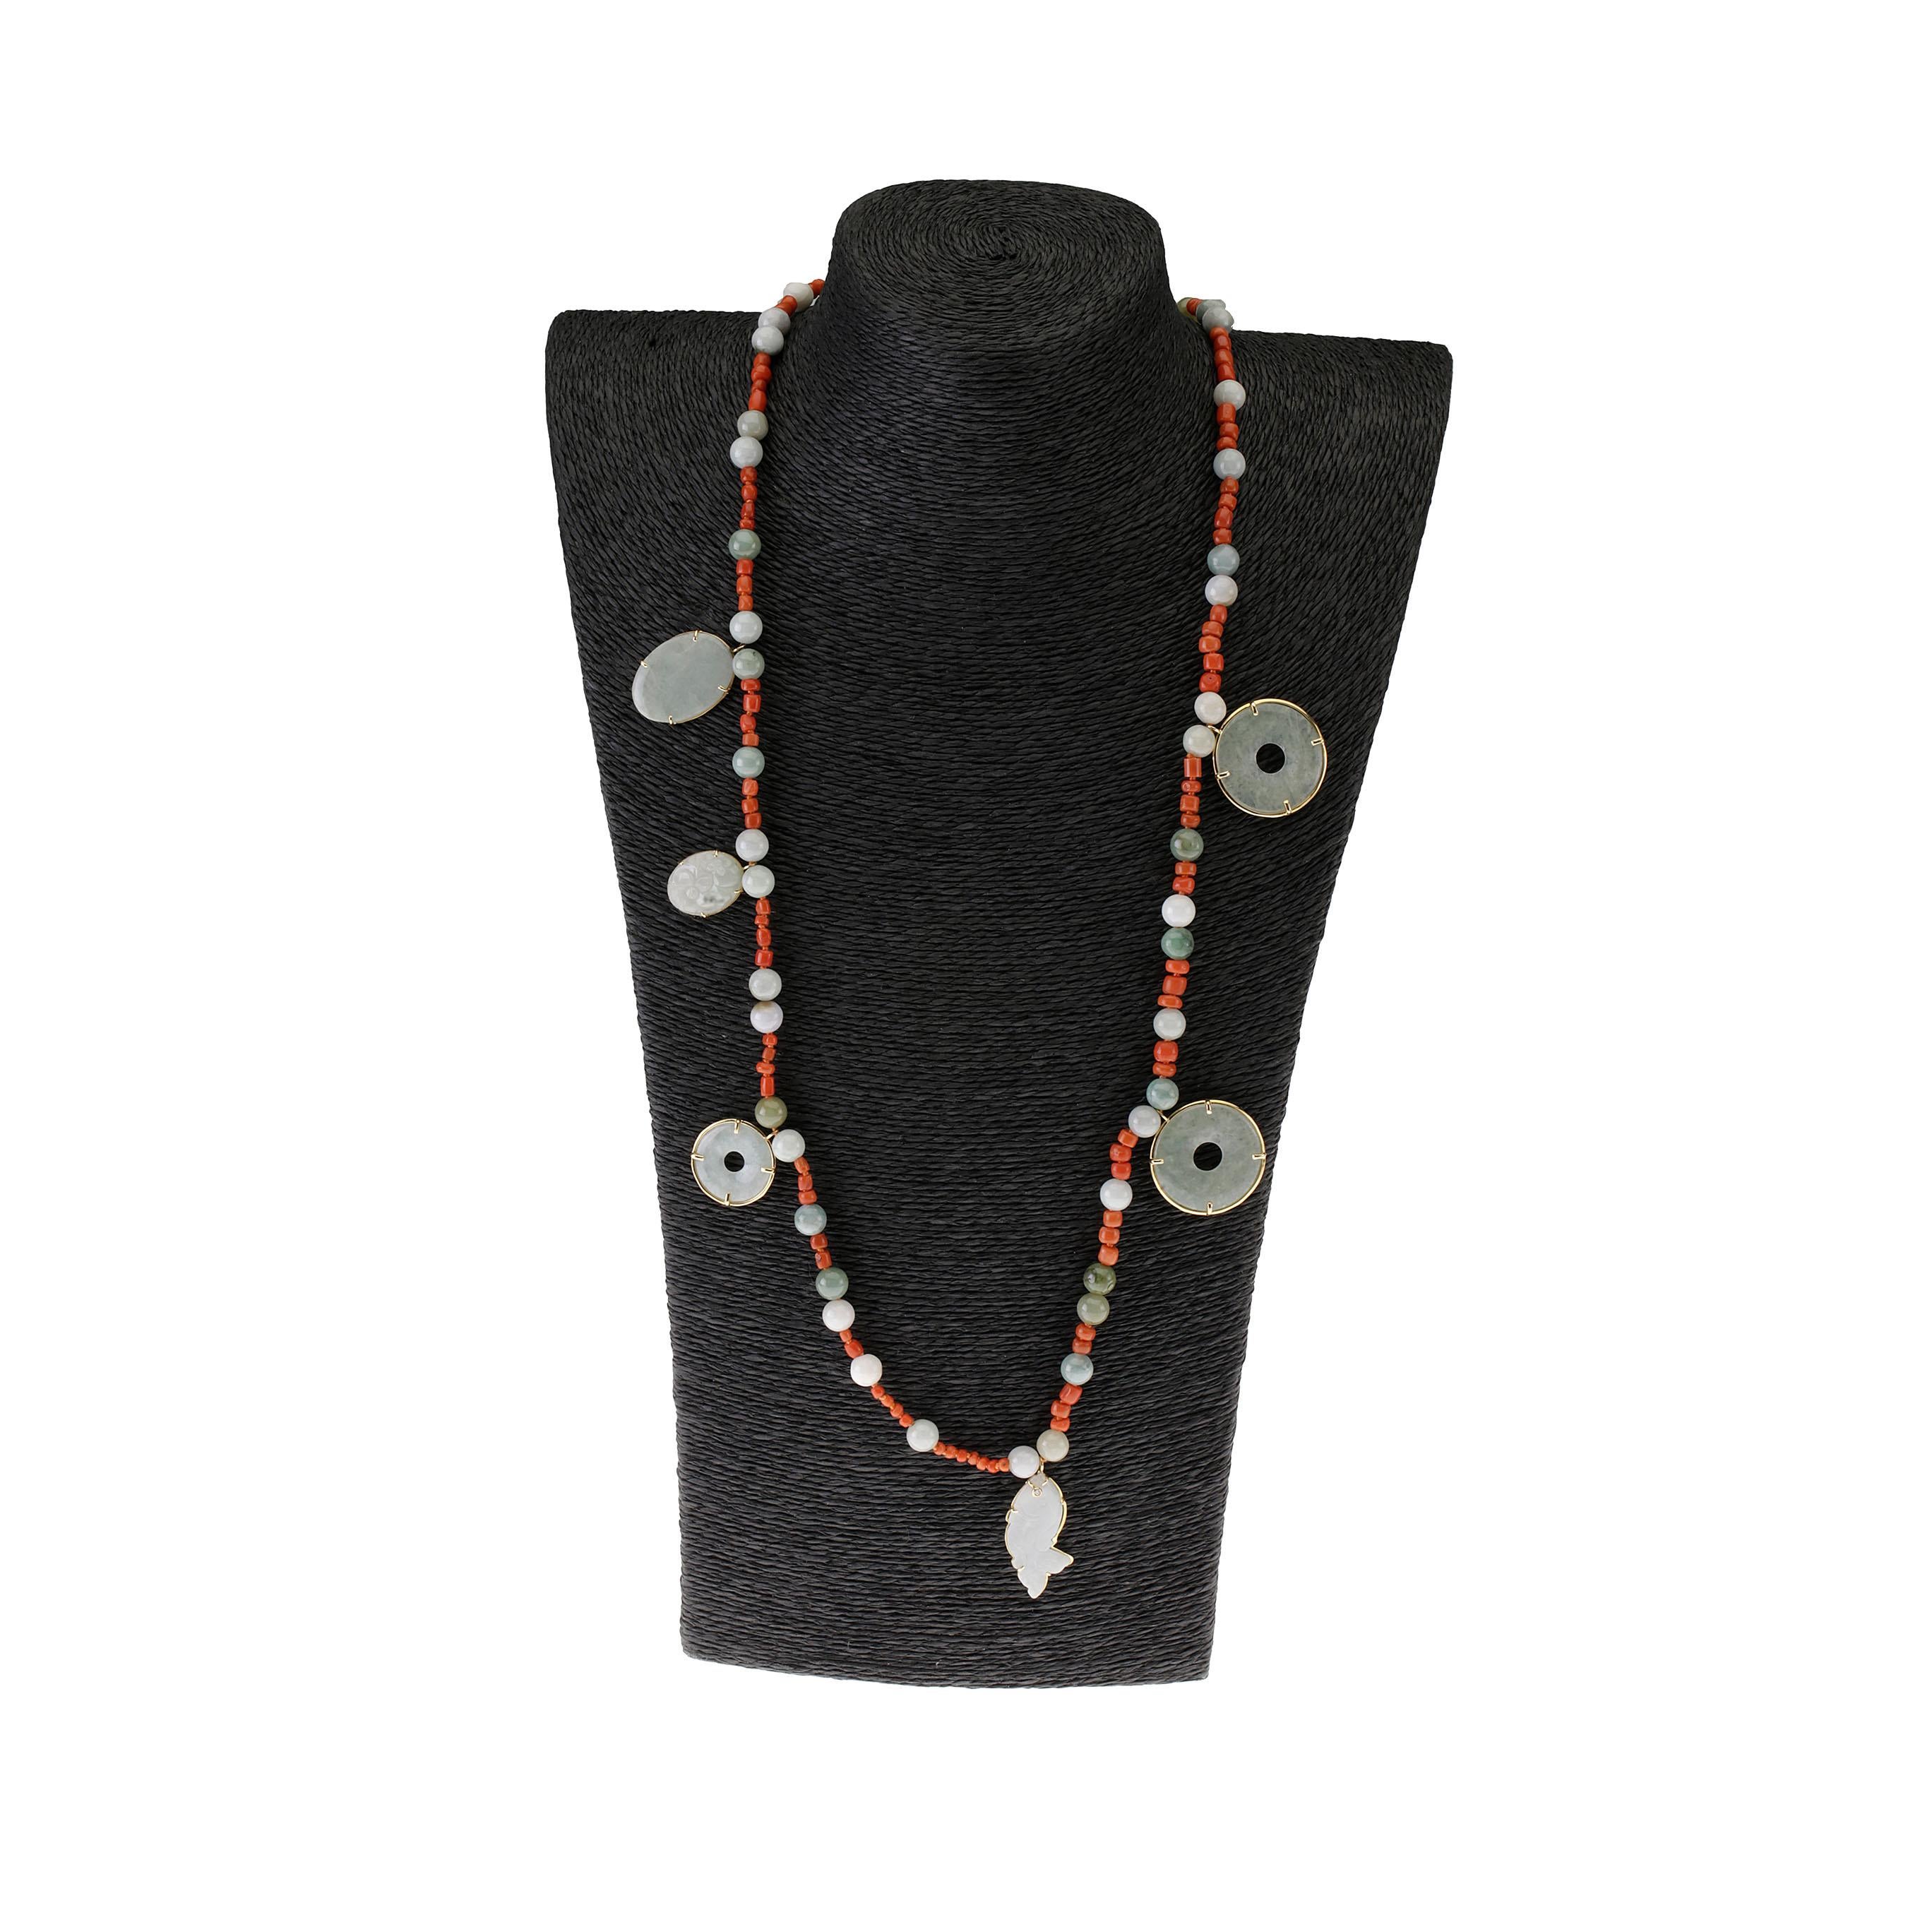 Long antiques jade necklace with little fish lucky symbol,  Bi and  antiques Sciacca Coral, 18 k Gold gr. 17. Length 80cm.
All Giulia Colussi jewelry is new and has never been previously owned or worn. Each item will arrive at your door beautifully